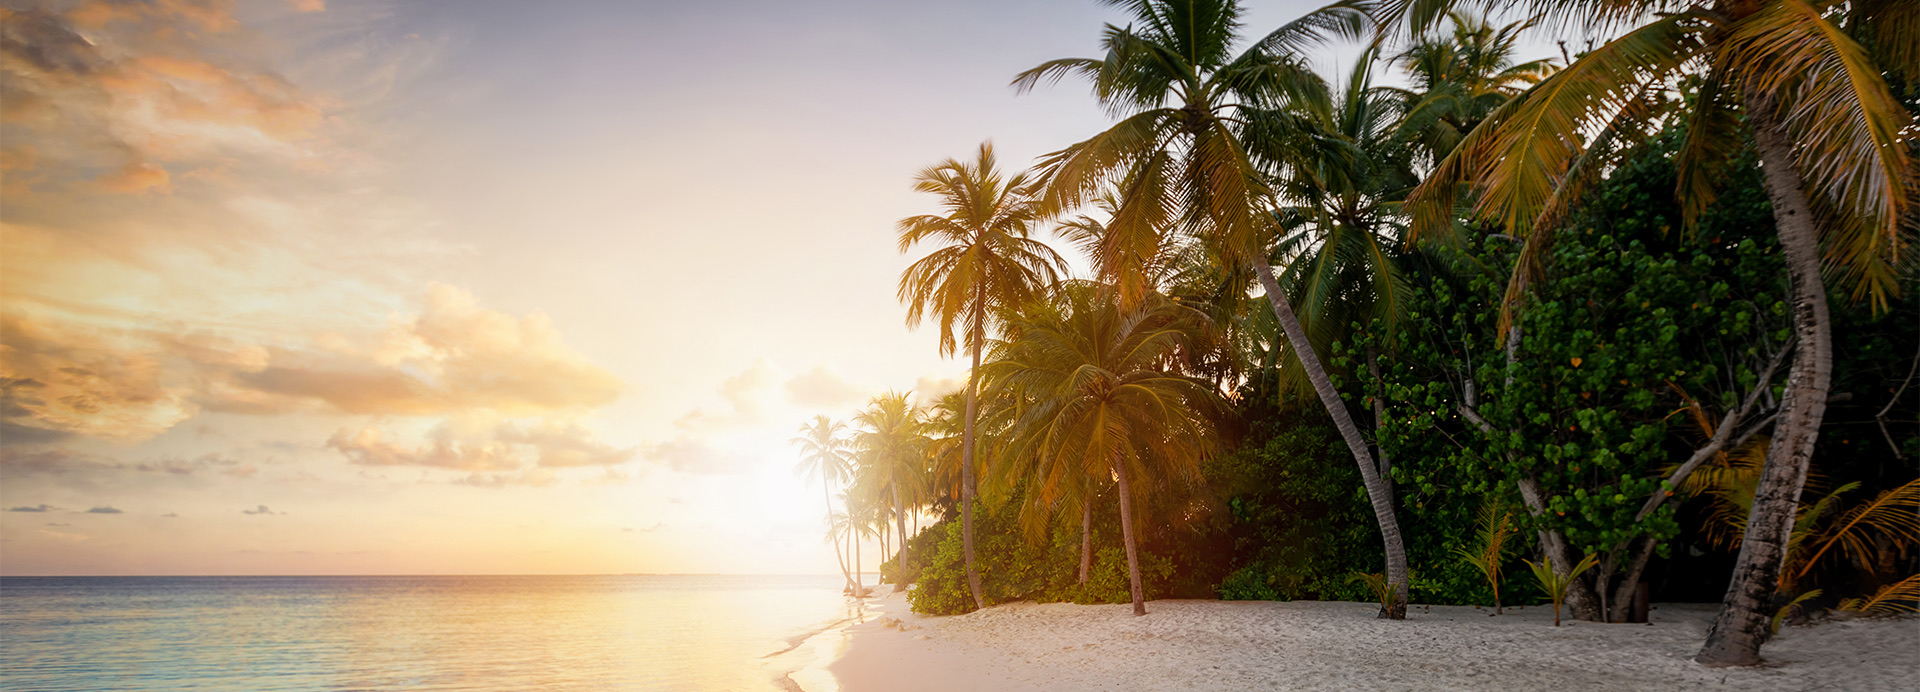 The beach with lots of tropical trees at sunset.